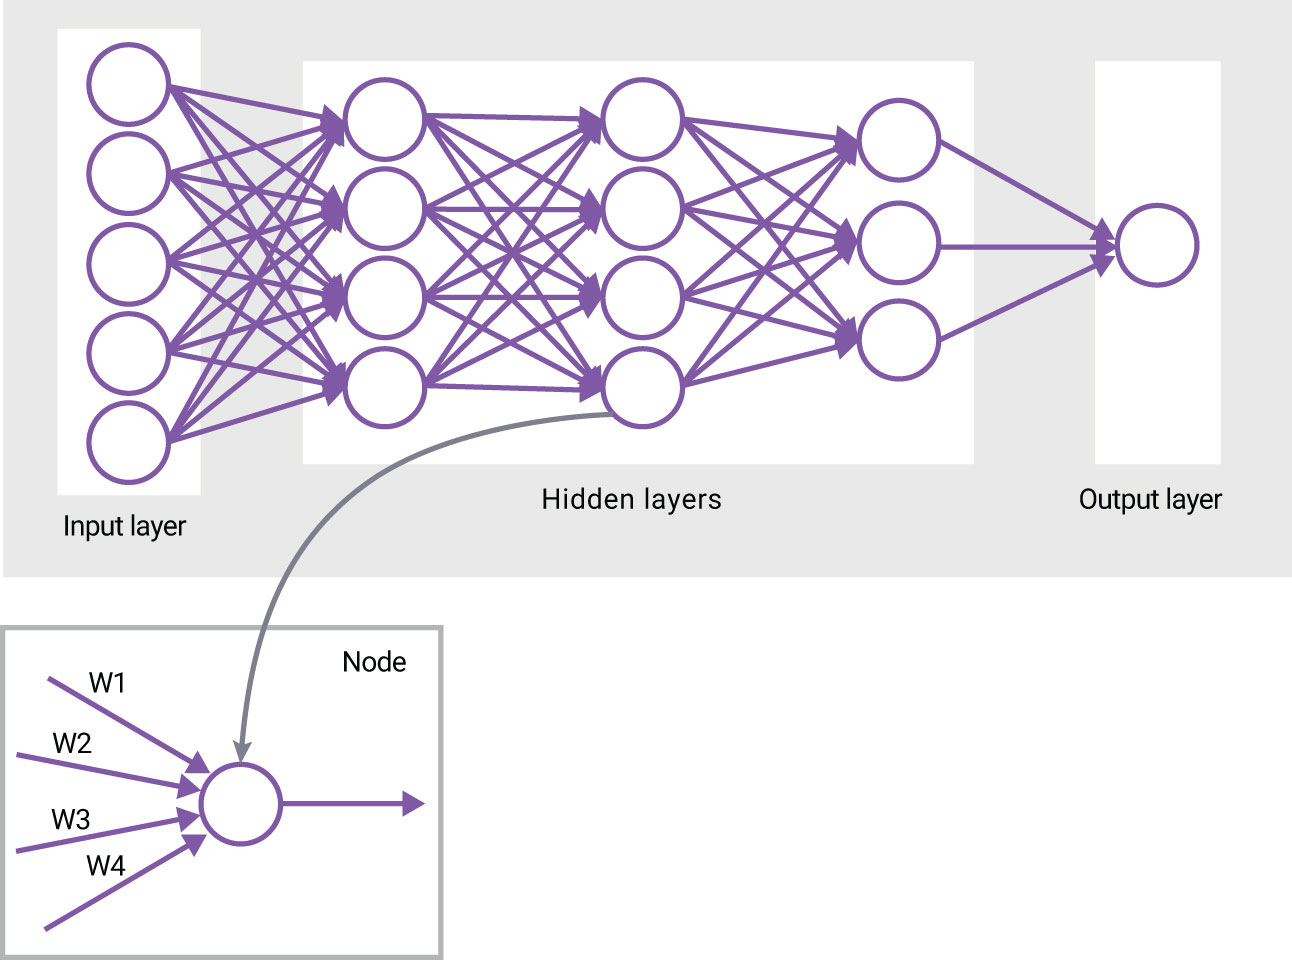 Figure 2: Deep Neural Network (DNN). Networks "trained" with large data sets "learn" to classify or detect objects; as networks learn, the weights (or coefficients) are adjusted and refined. 